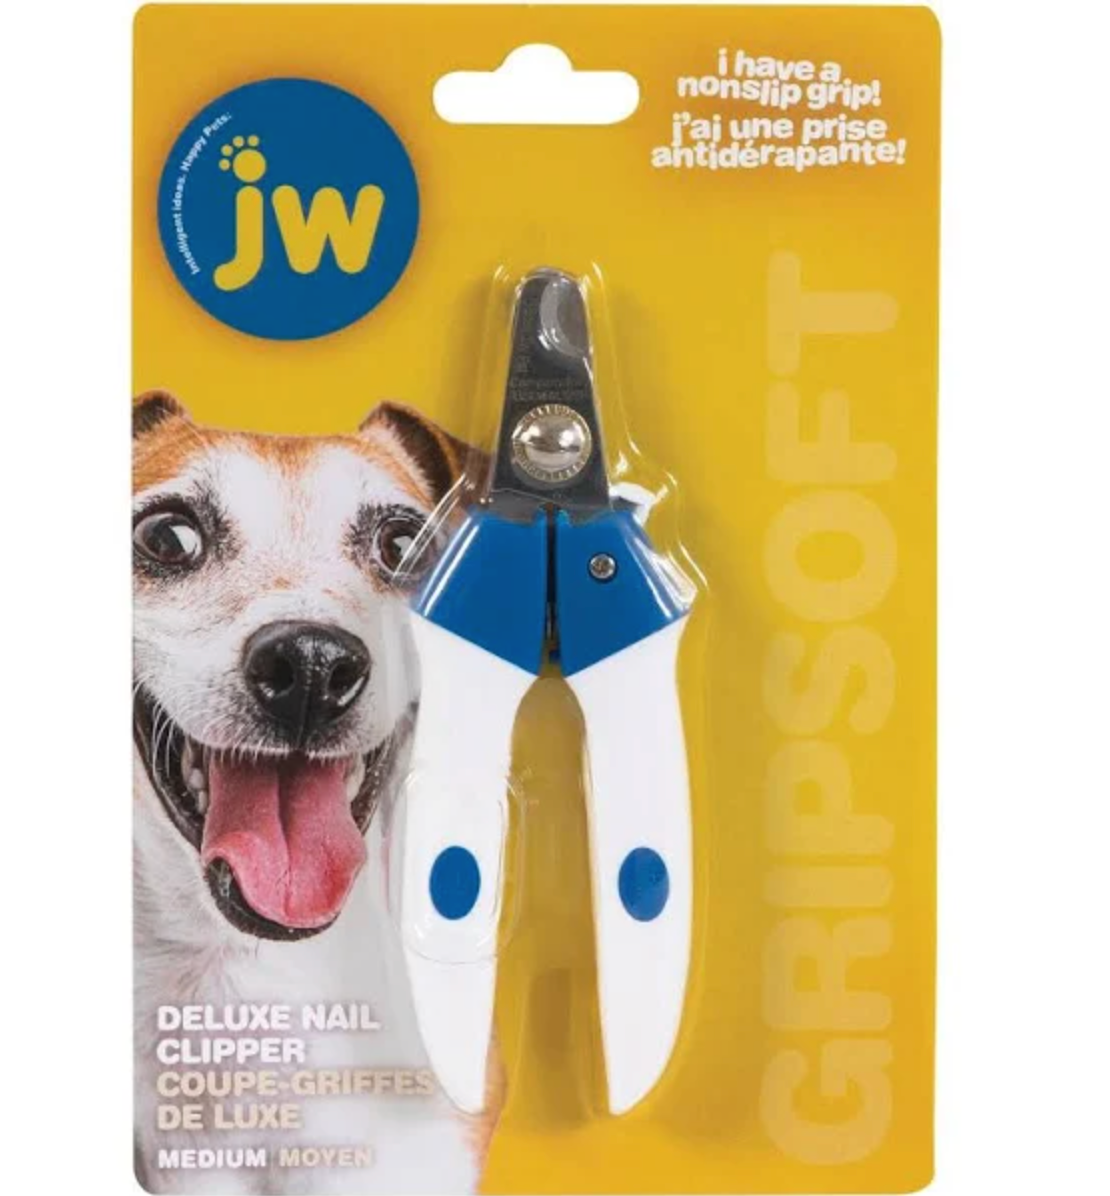 JW Deluxe Nail Clippers, 2 Sizes